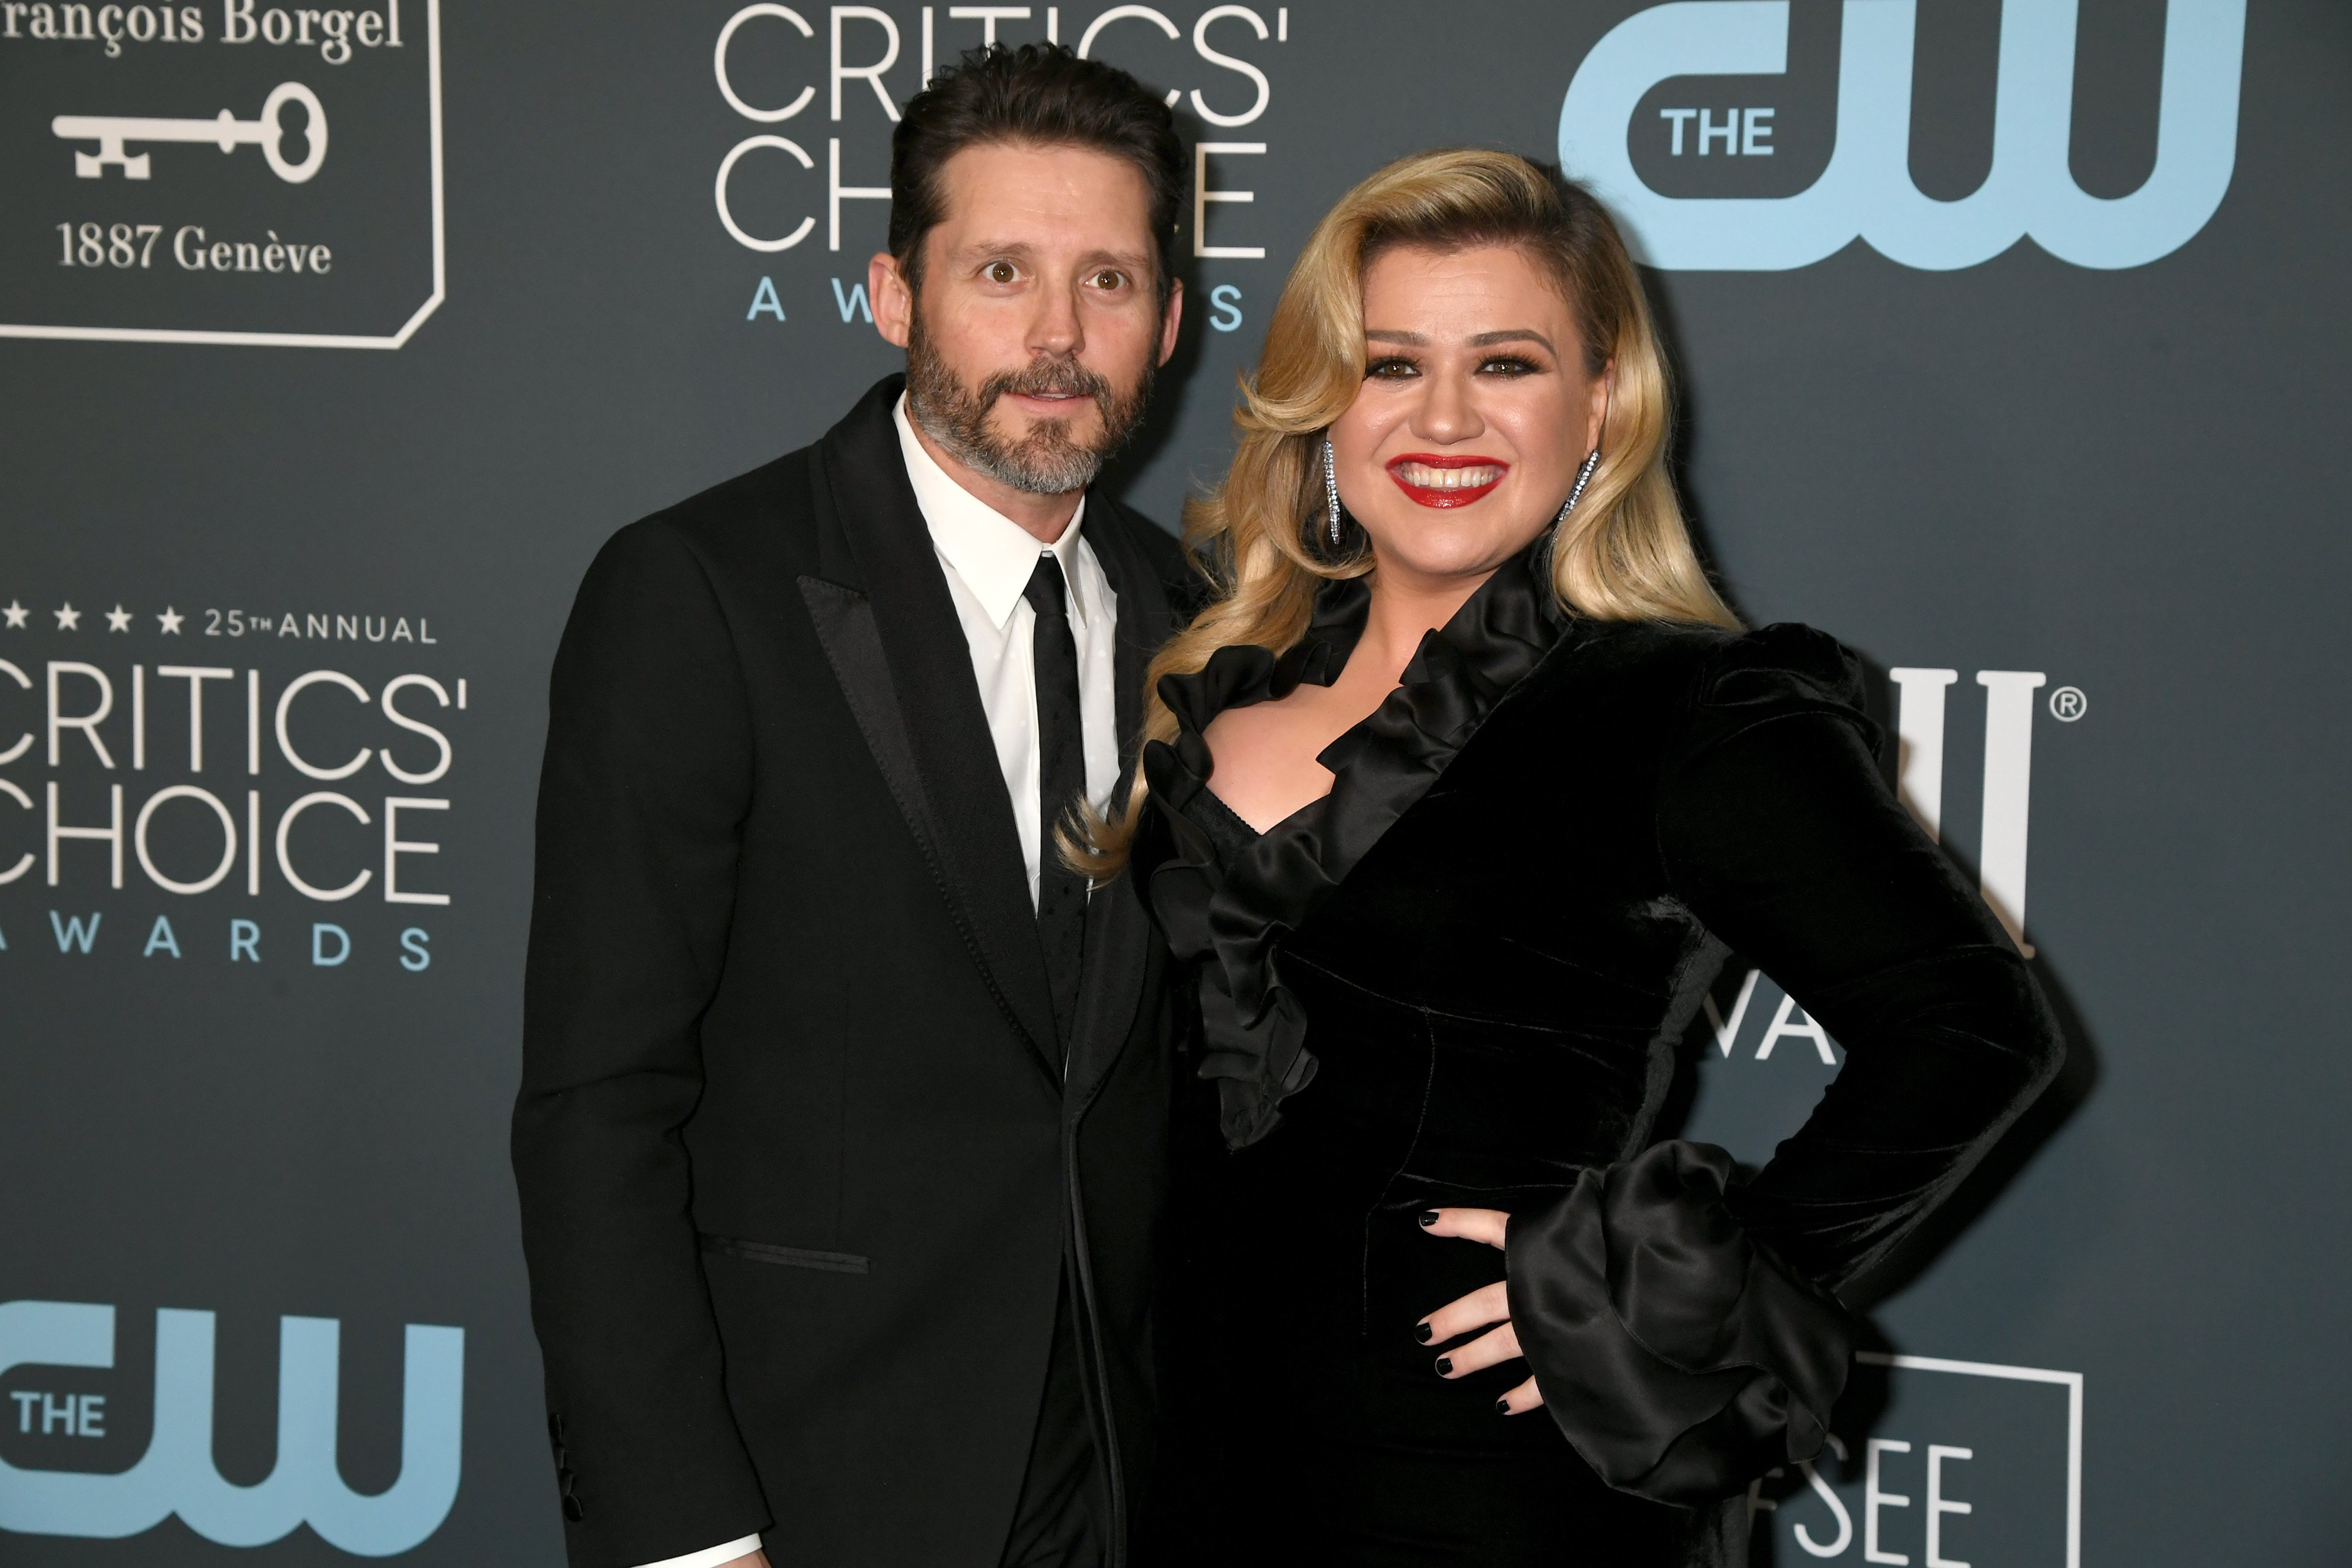 Brandon Blackstock and his wife Kelly Clarkson attending the 25th Annual Critics' Choice Awards at Barker Hangar on January 12, 2020 in Santa Monica, California | Source: Getty Images